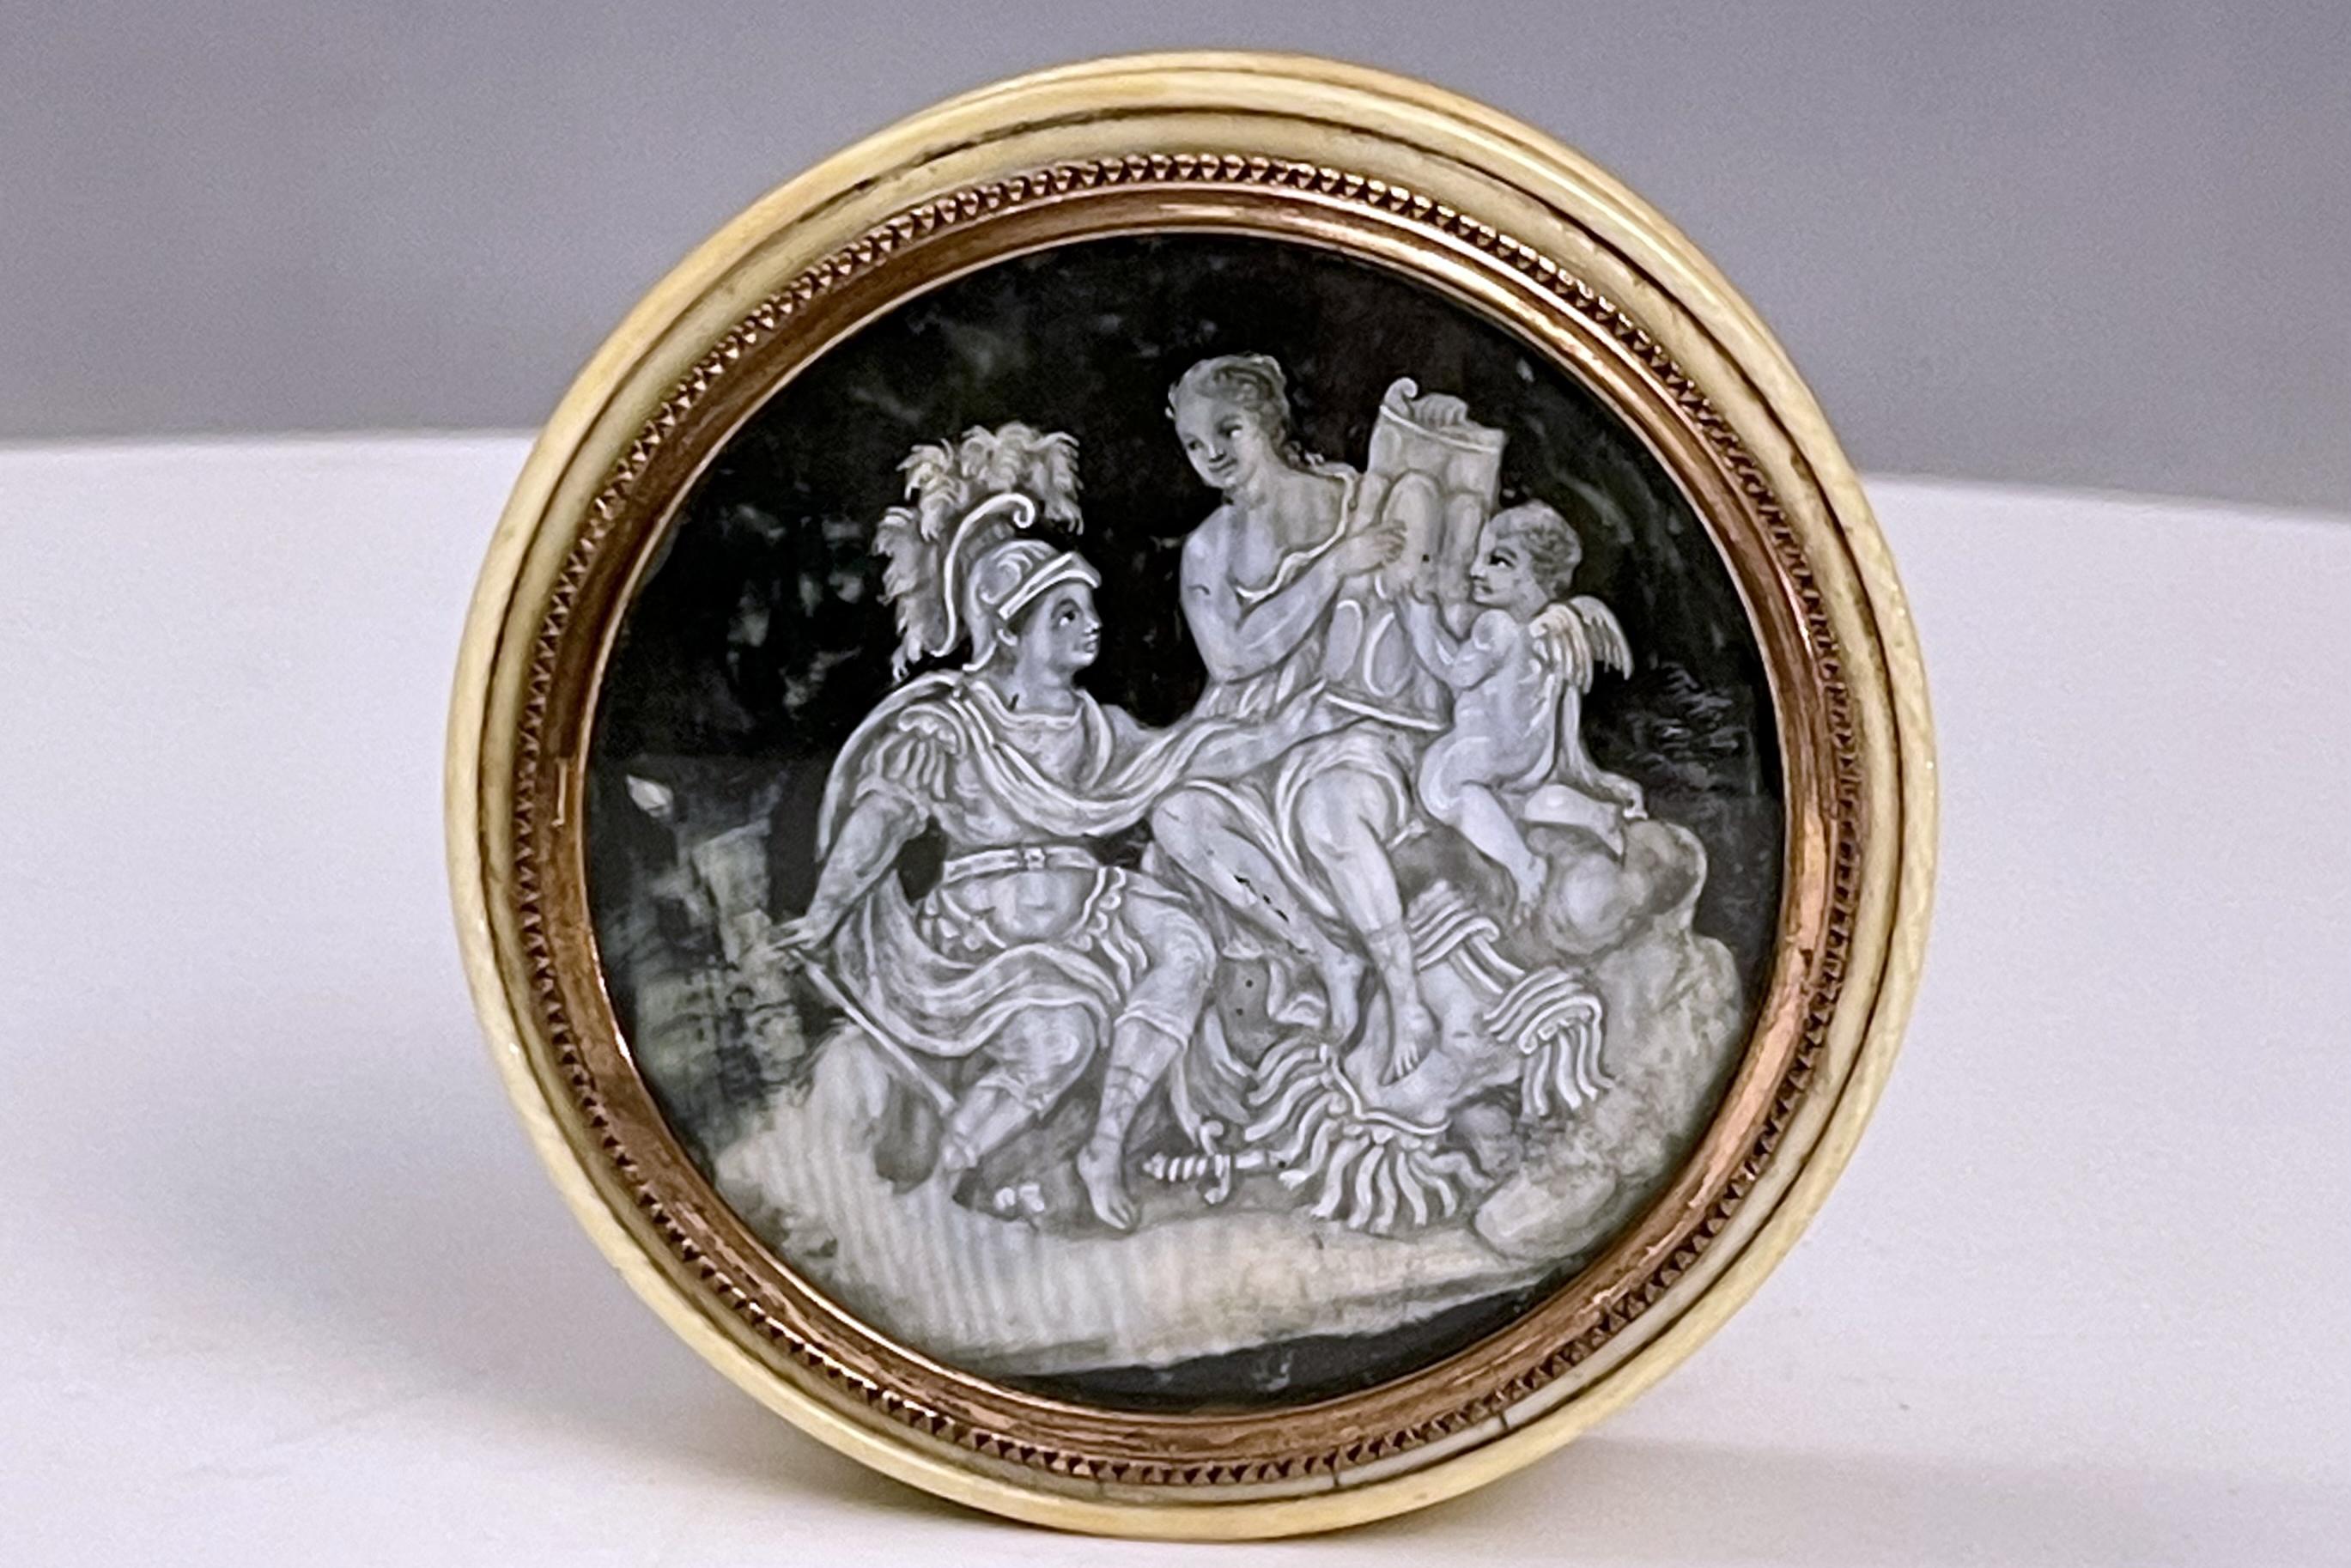 Ivory and tortoiseshell snuffbox with 18 K gold rim. A grisaille miniature depicting Mars, Venus and Cupid. France second half of 18th Century. (SHIP TO EU ONLY)